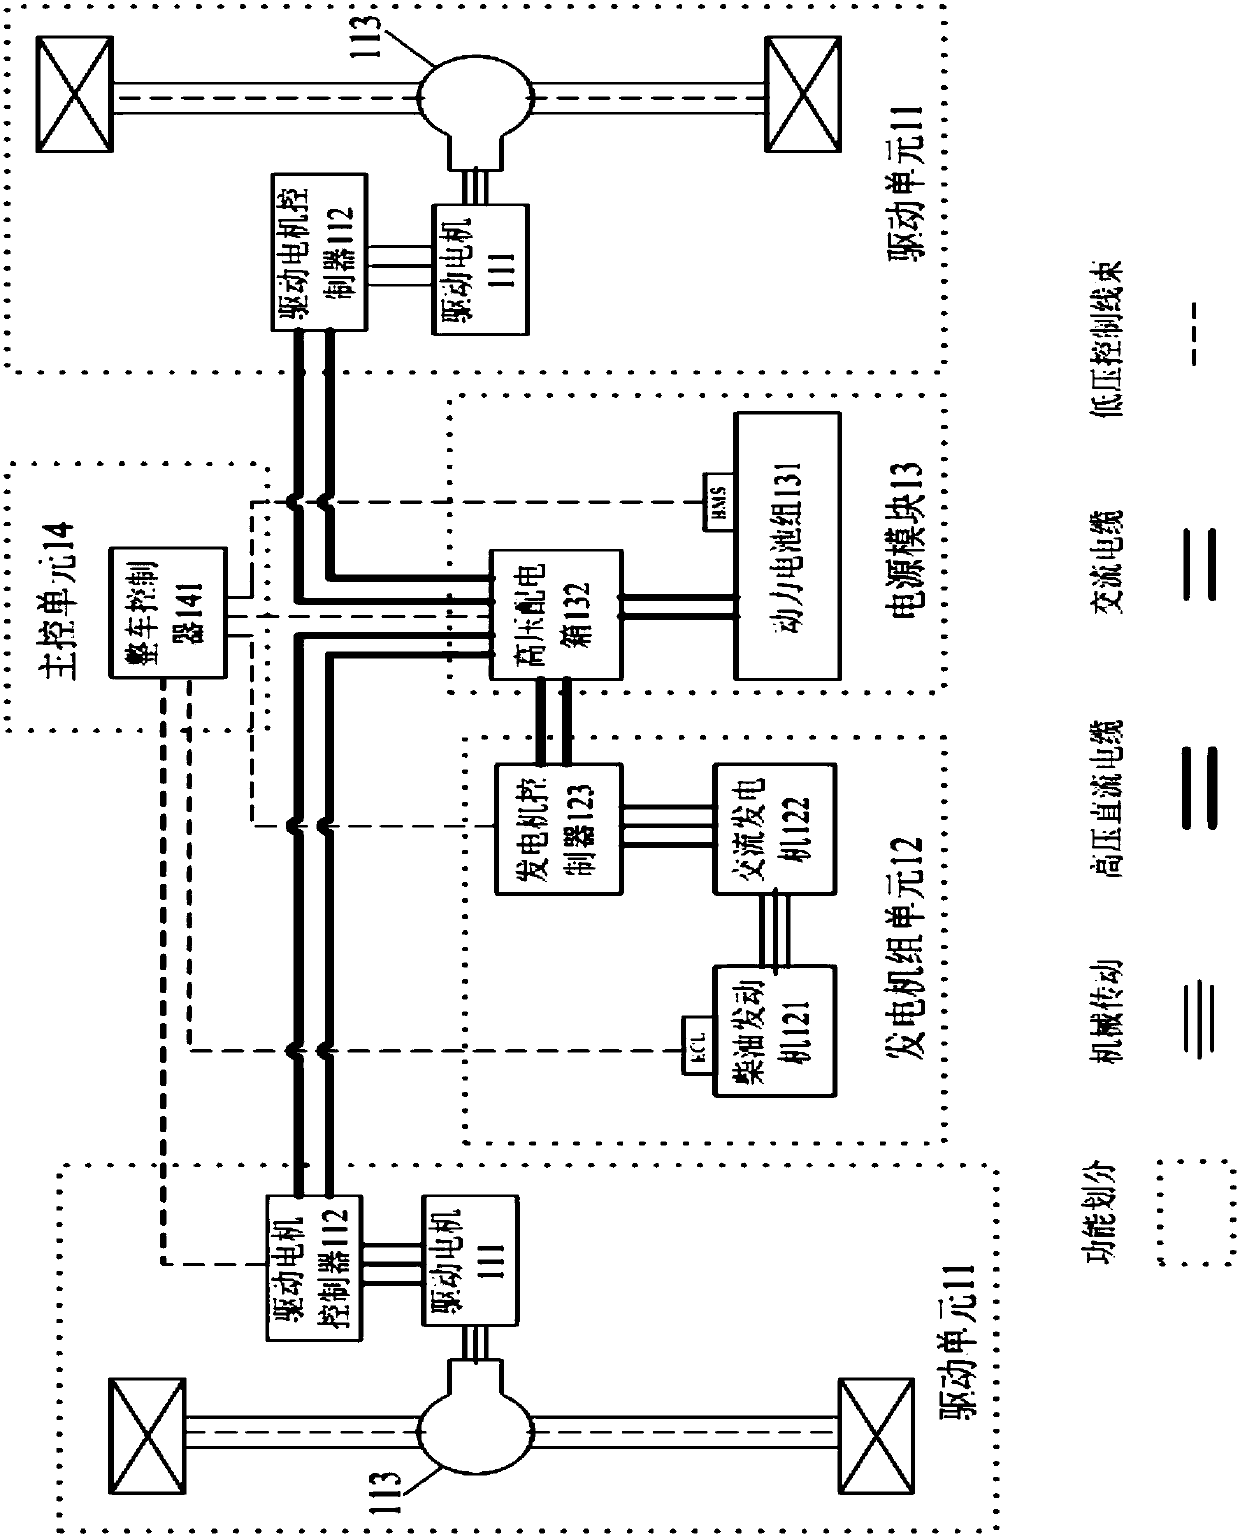 Hybrid power assembly control system special for automated guided vehicle